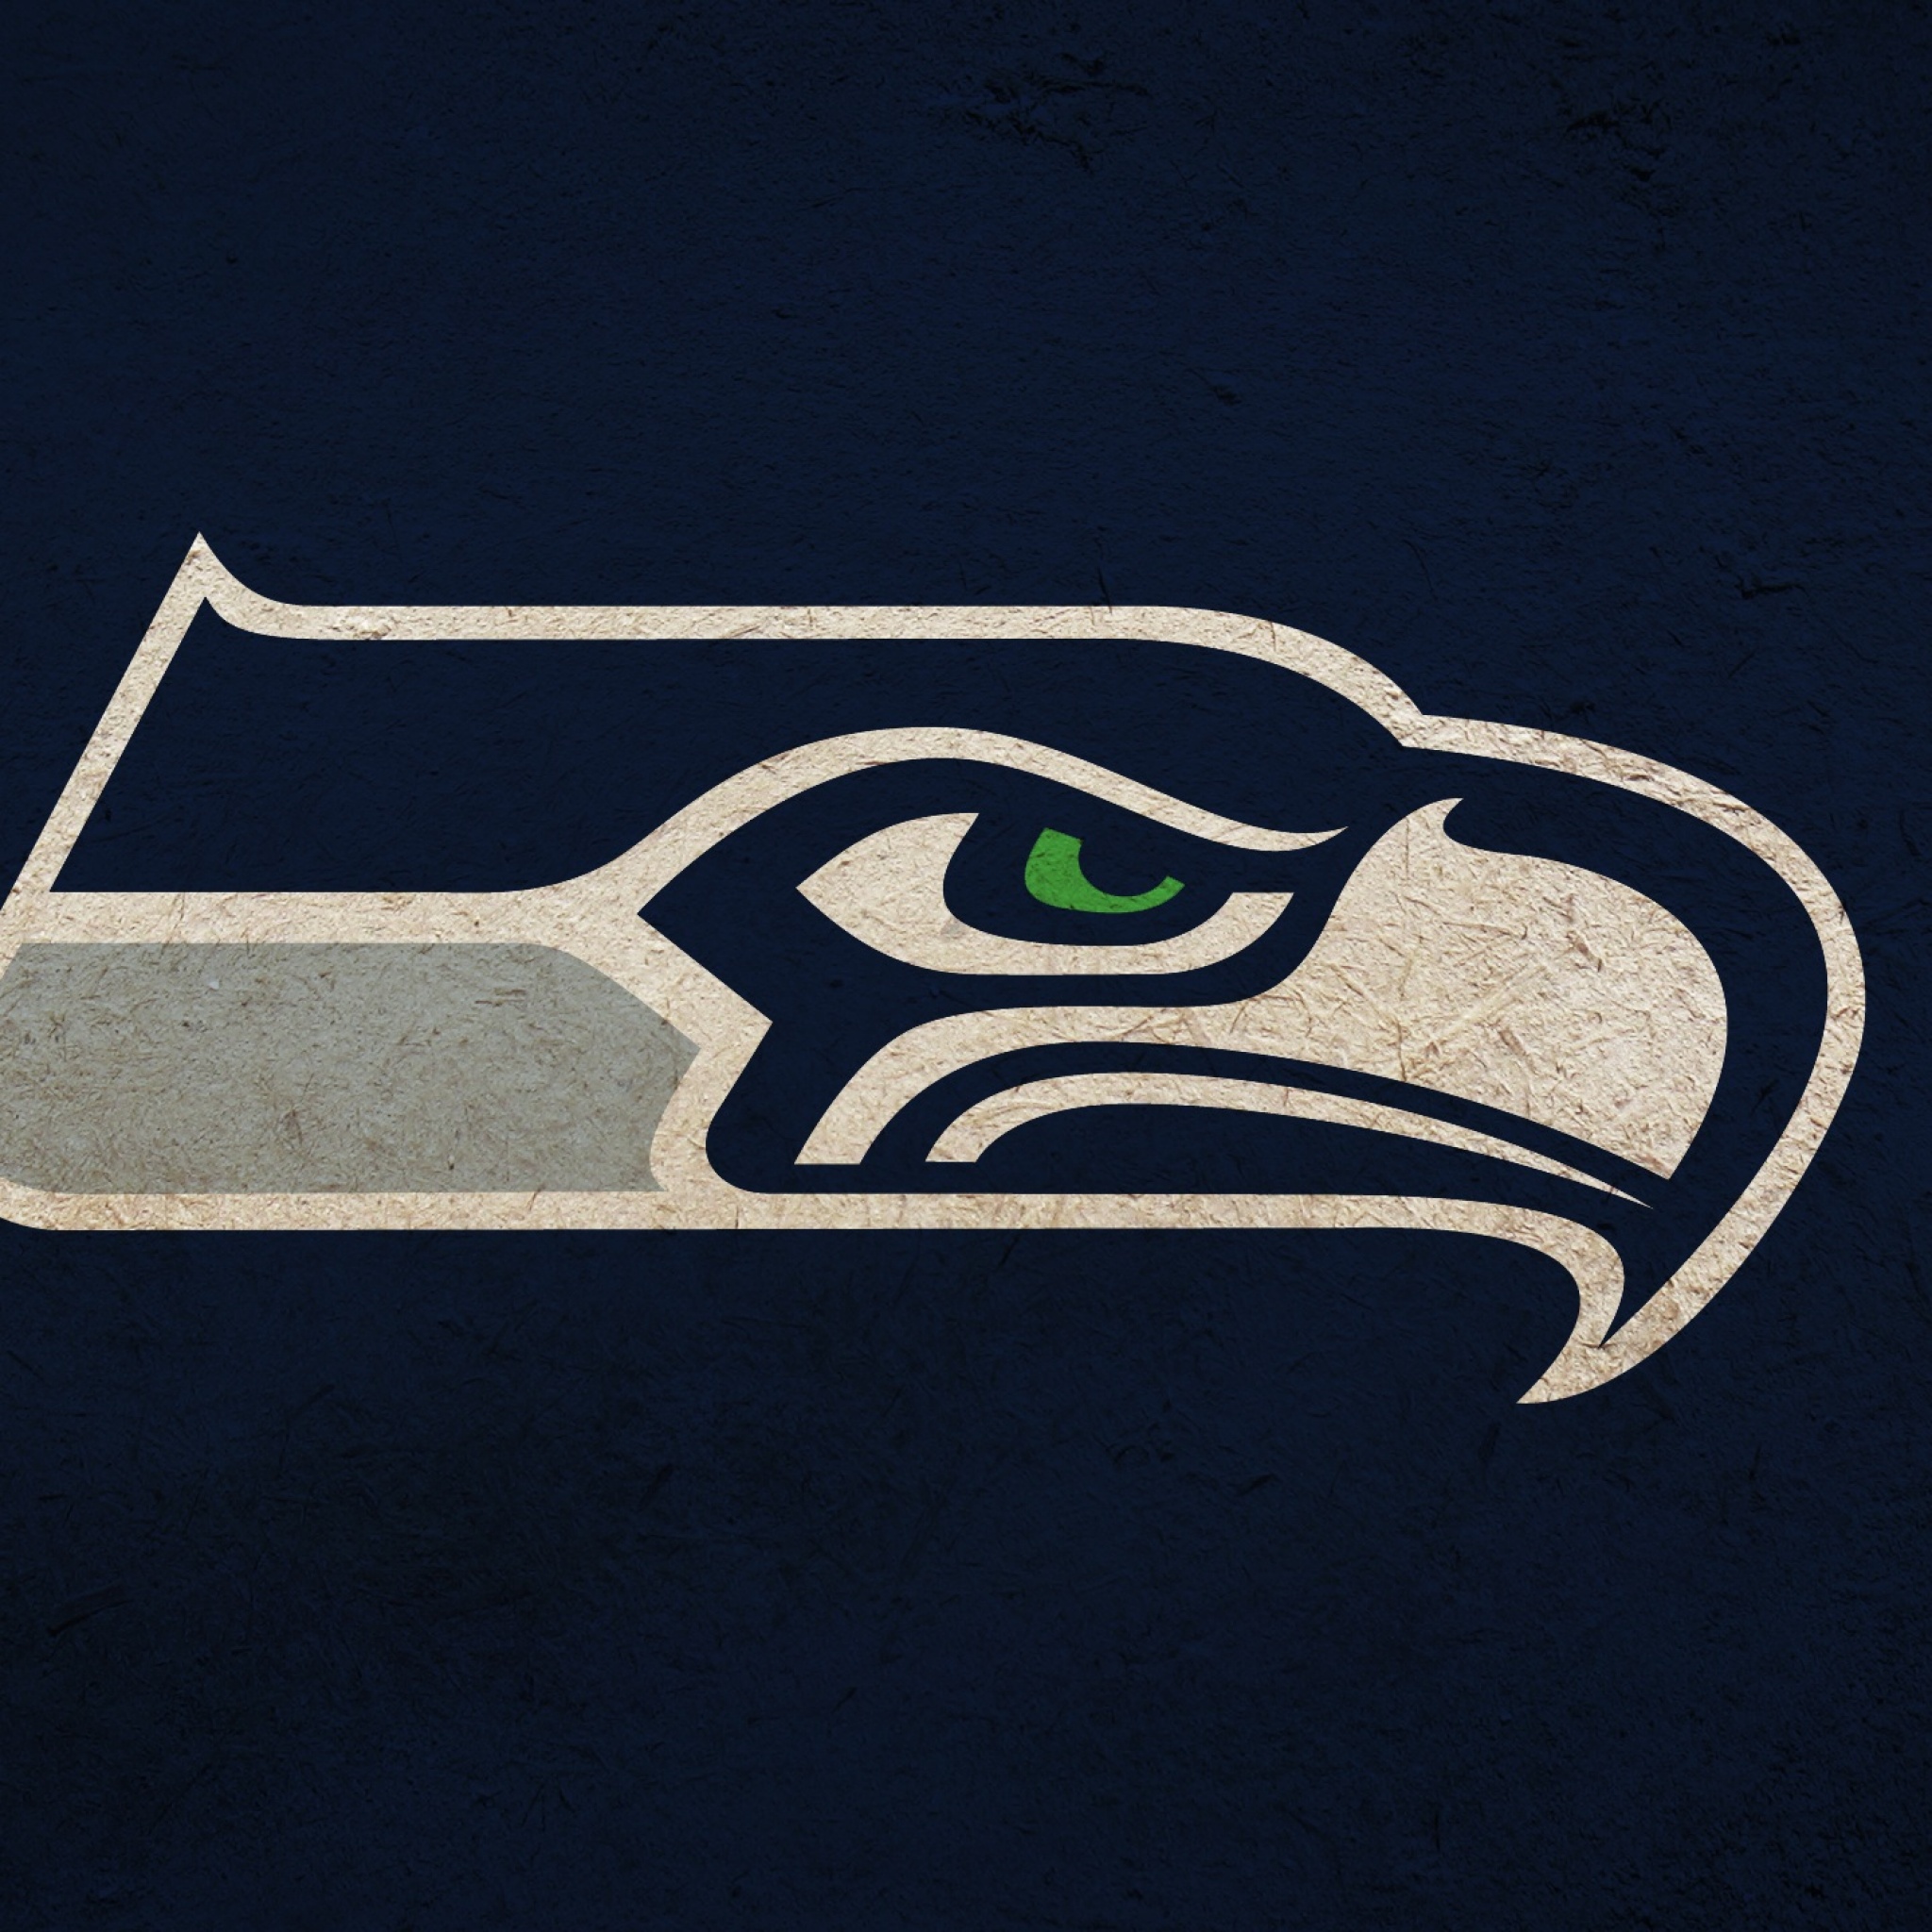 Superbowl XLIX wallpapers for iPhone and iPad